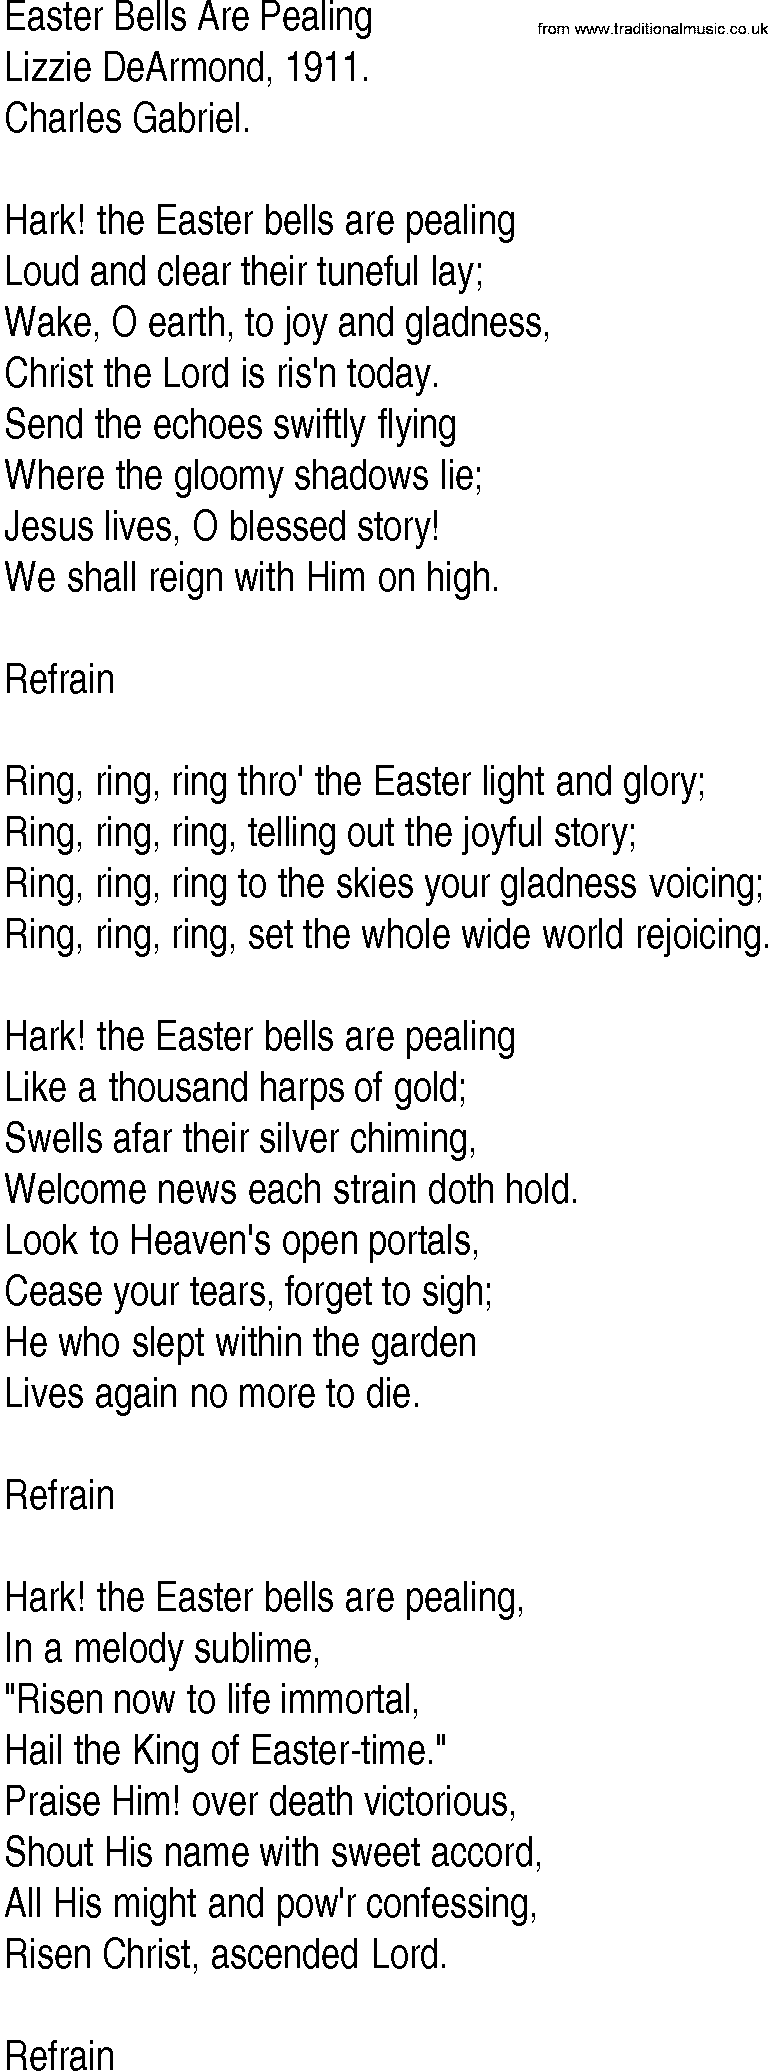 Hymn and Gospel Song: Easter Bells Are Pealing by Lizzie DeArmond lyrics